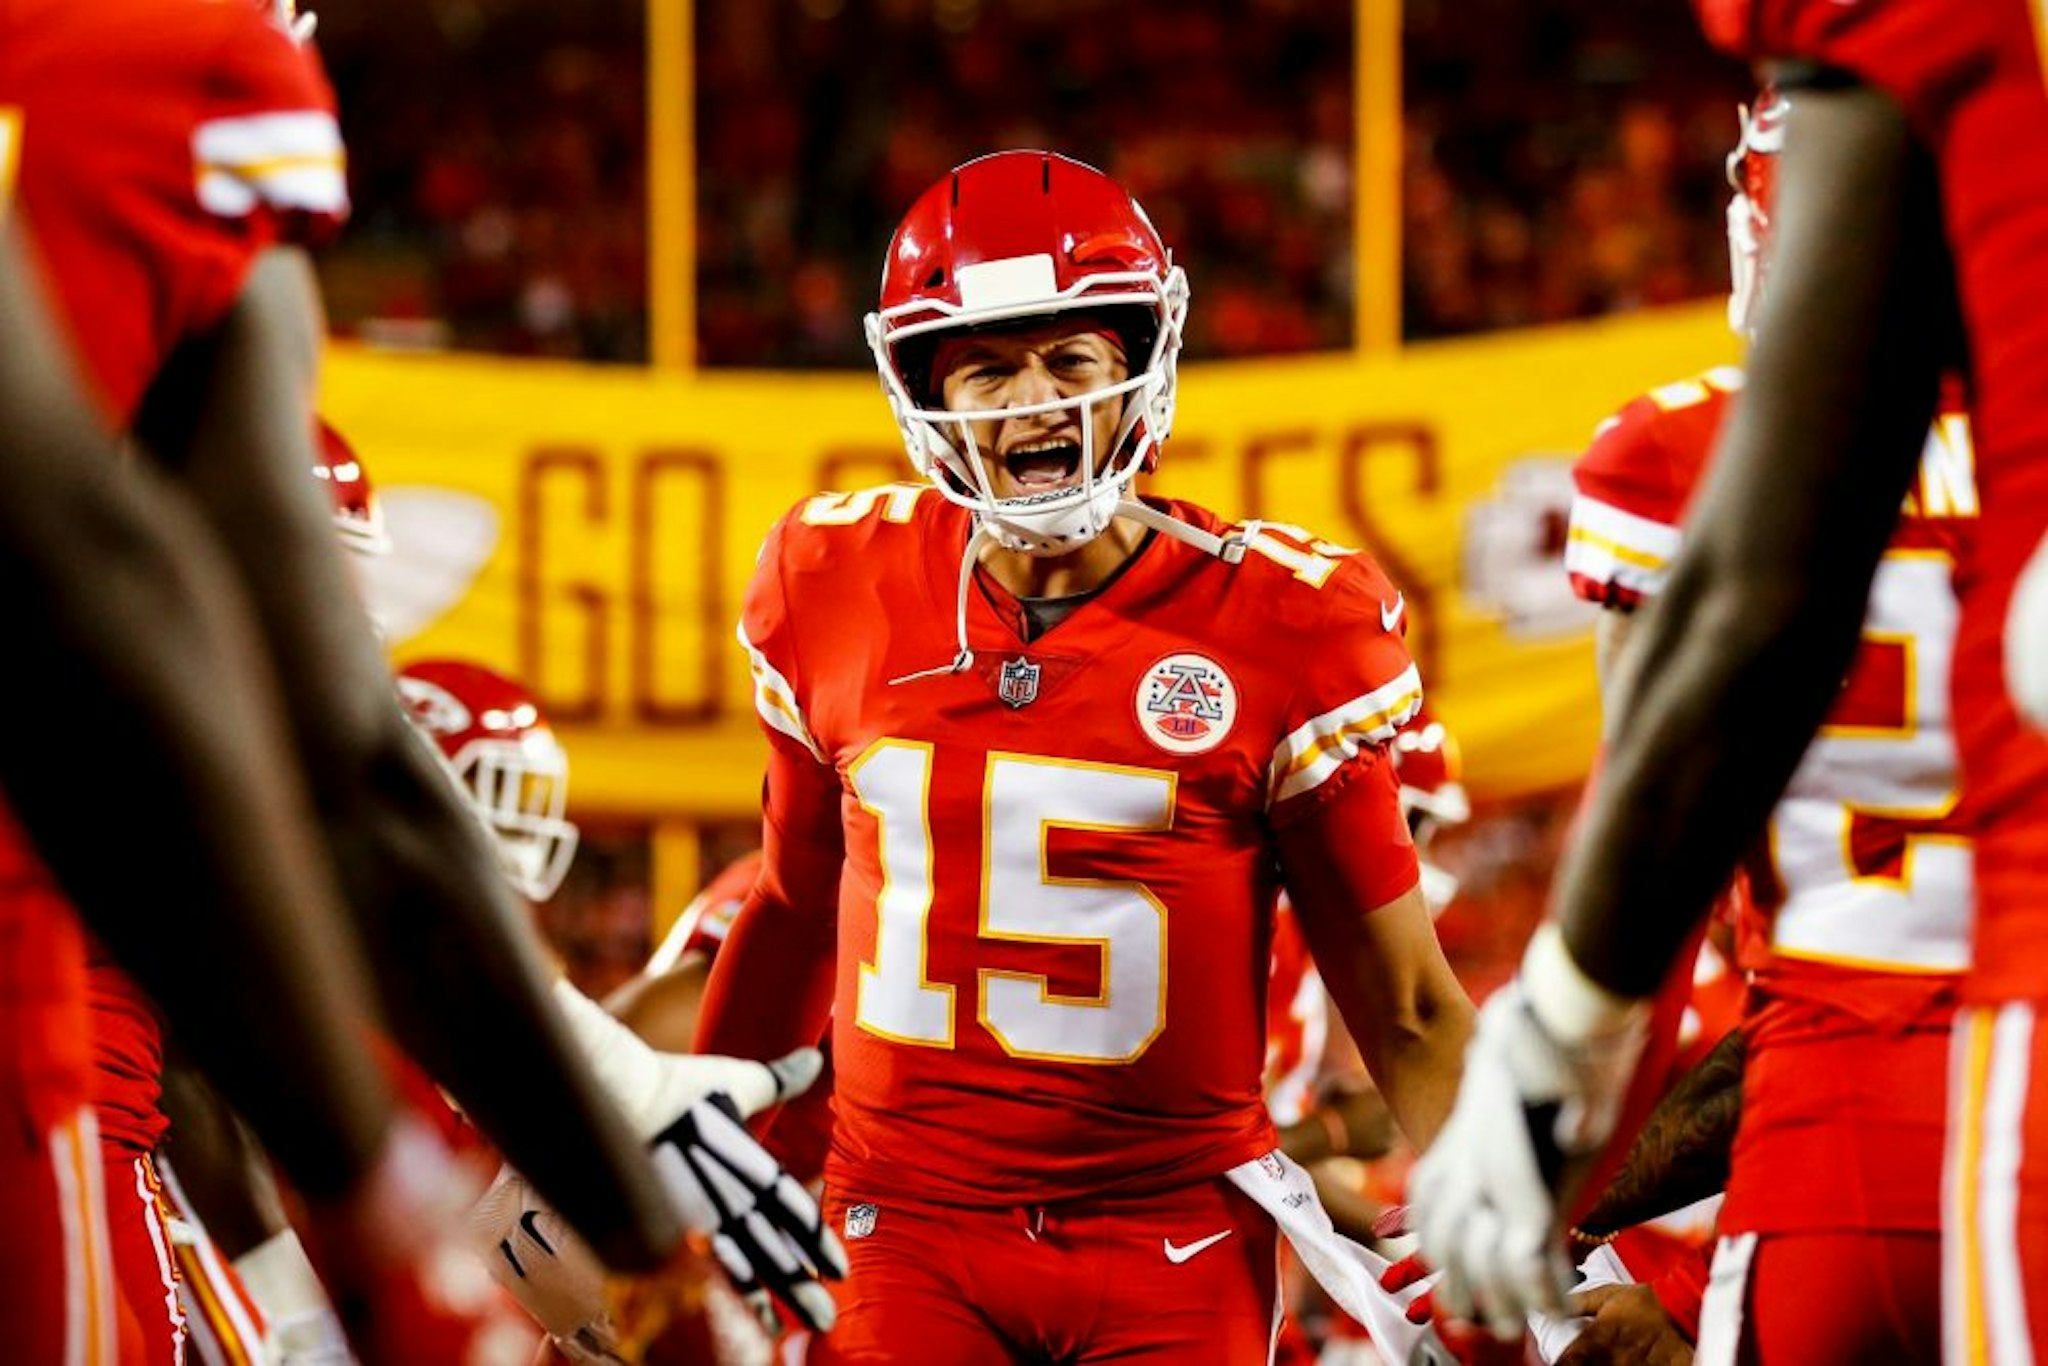 KANSAS CITY, MO - OCTOBER 21: Patrick Mahomes #15 of the Kansas City Chiefs runs through high fives from teammates during pre game introductions prior to the game against the Cincinnati Bengals at Arrowhead Stadium on October 21, 2018 in Kansas City, Kansas.